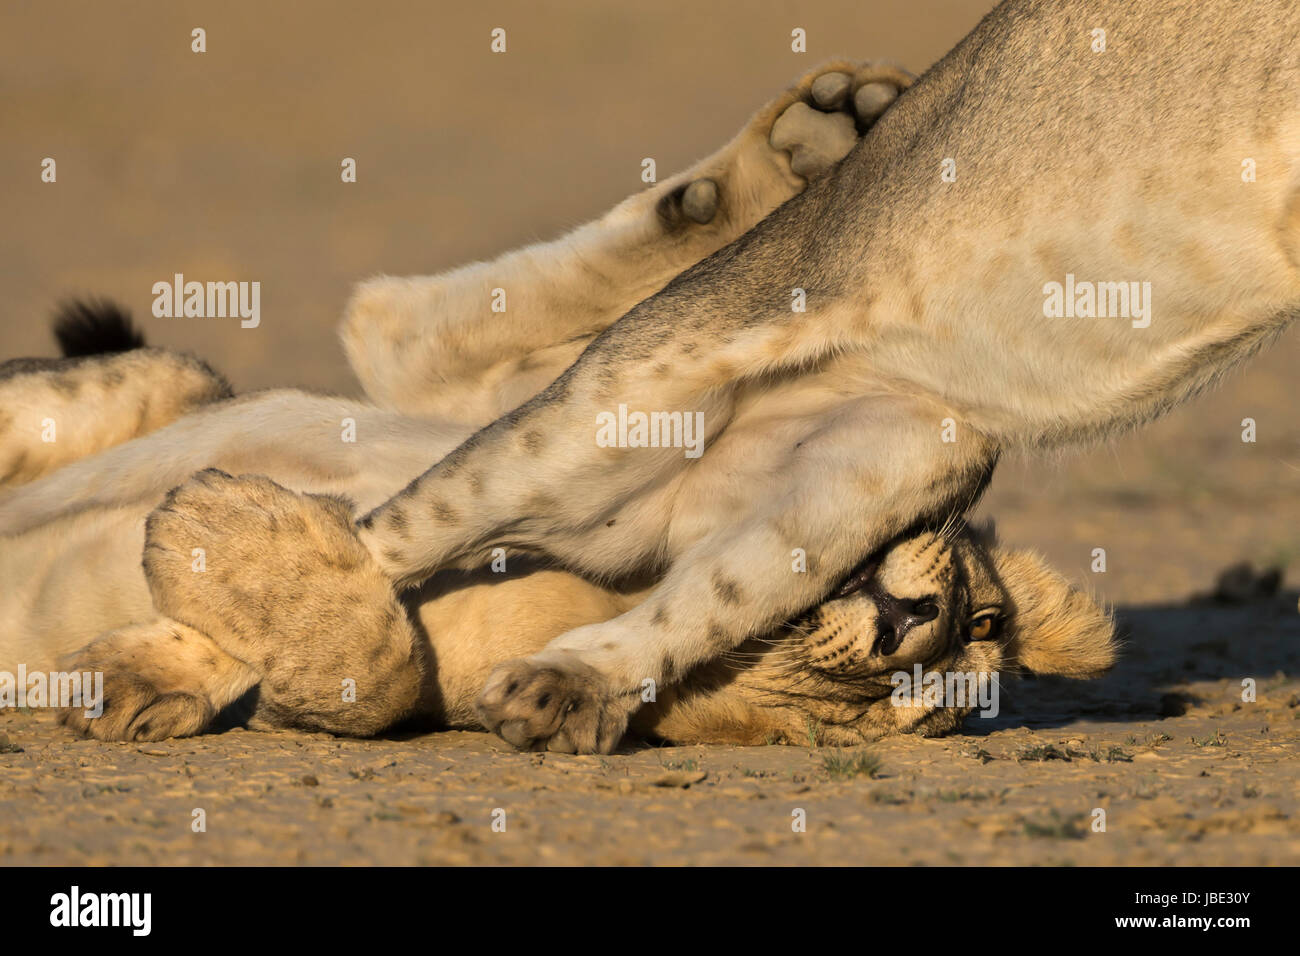 Young lions (Panthera leo) playing, Kgalagadi transfrontier park, Northern Cape, South Africa, February 2017 Stock Photo